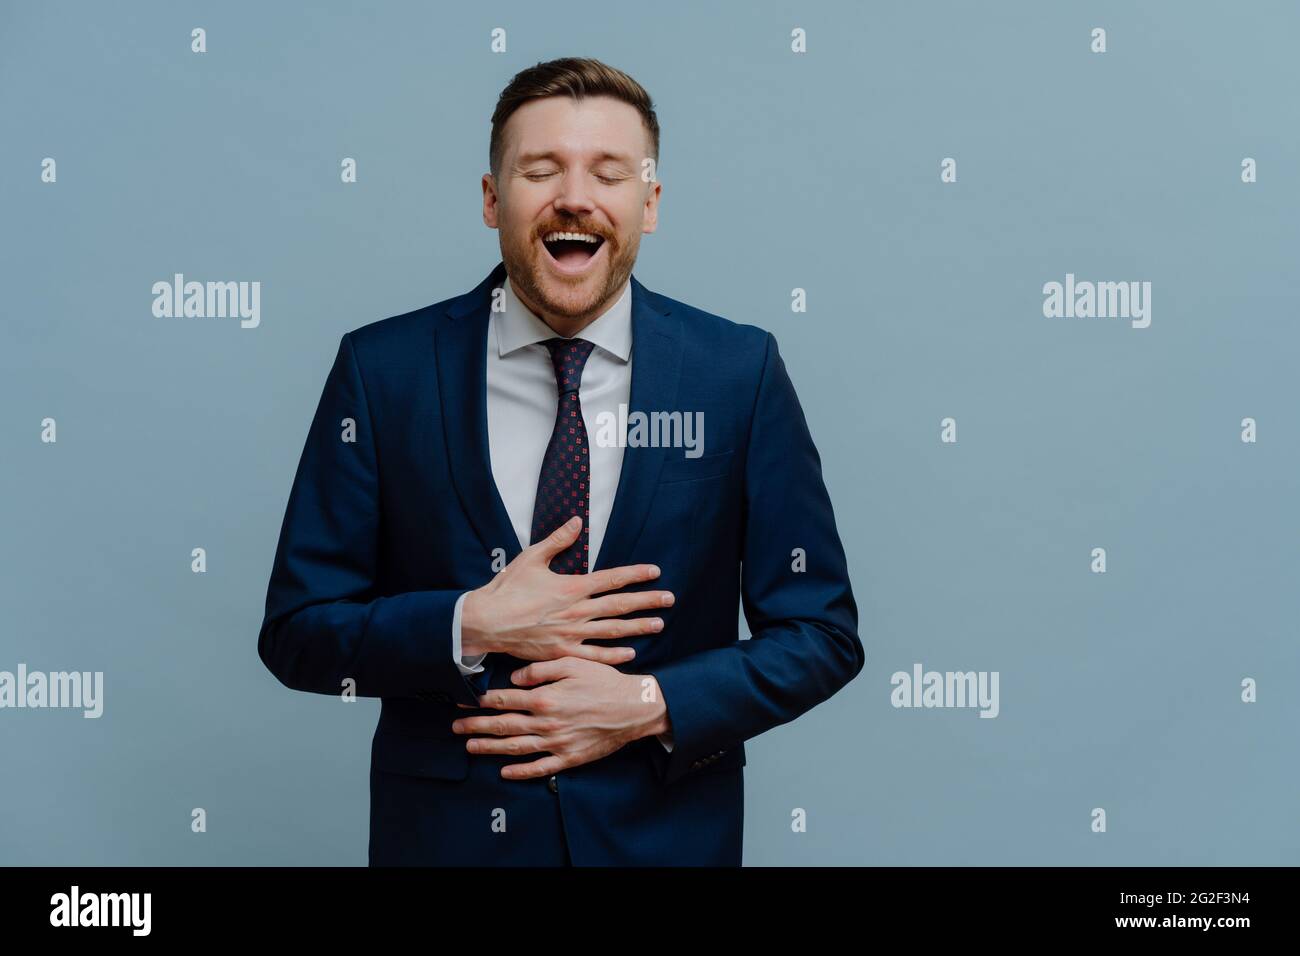 Overjoyed businessman in suit laughing out loud and having fun Stock Photo